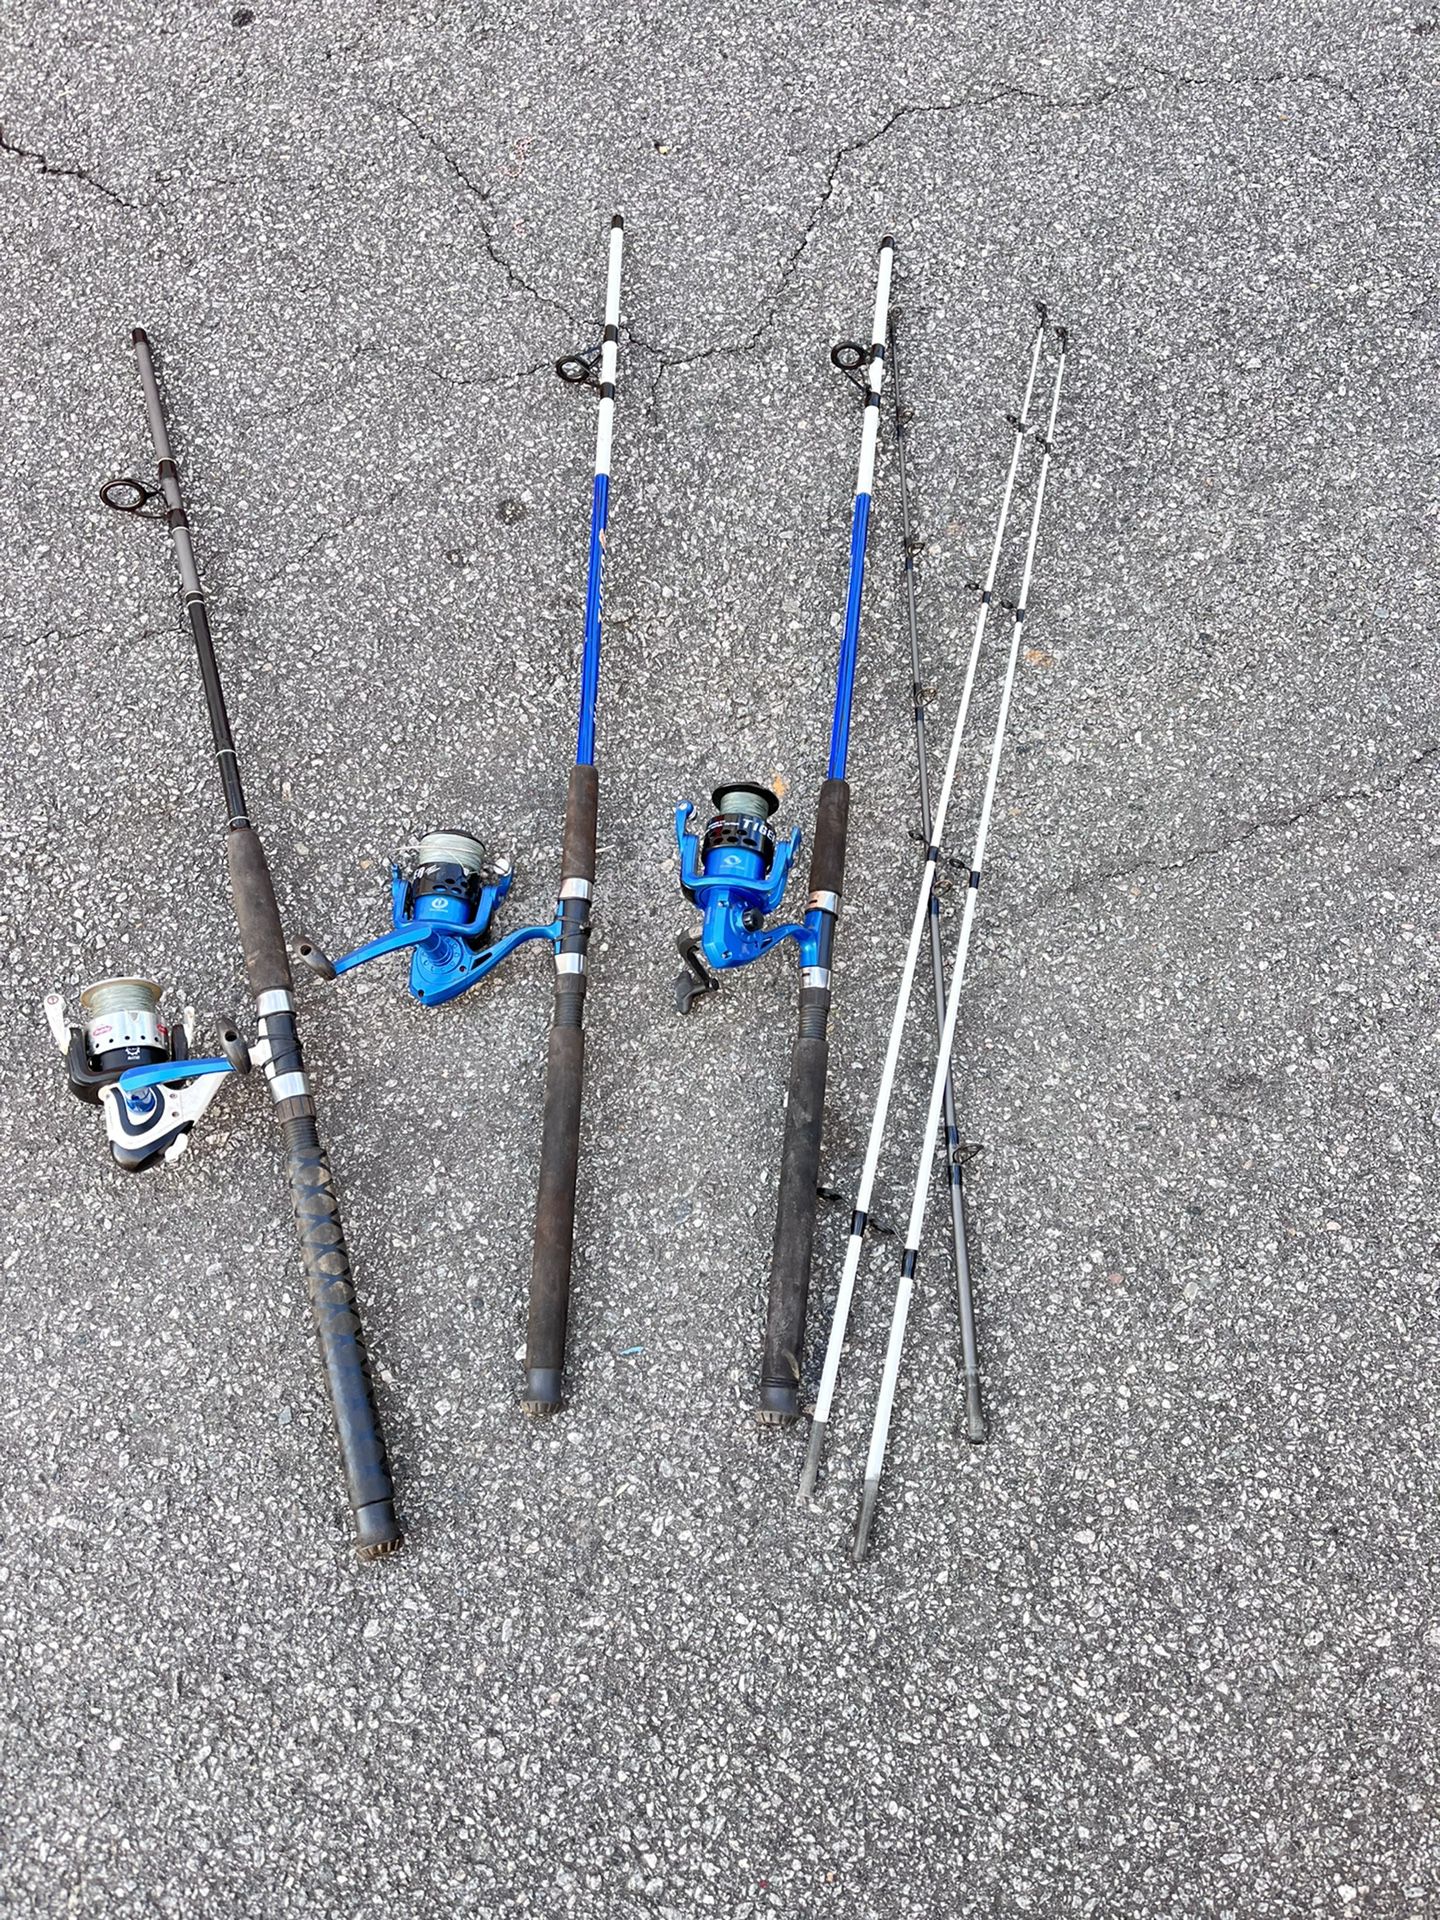 Fishing Rods for Sale in Smyrna, GA - OfferUp